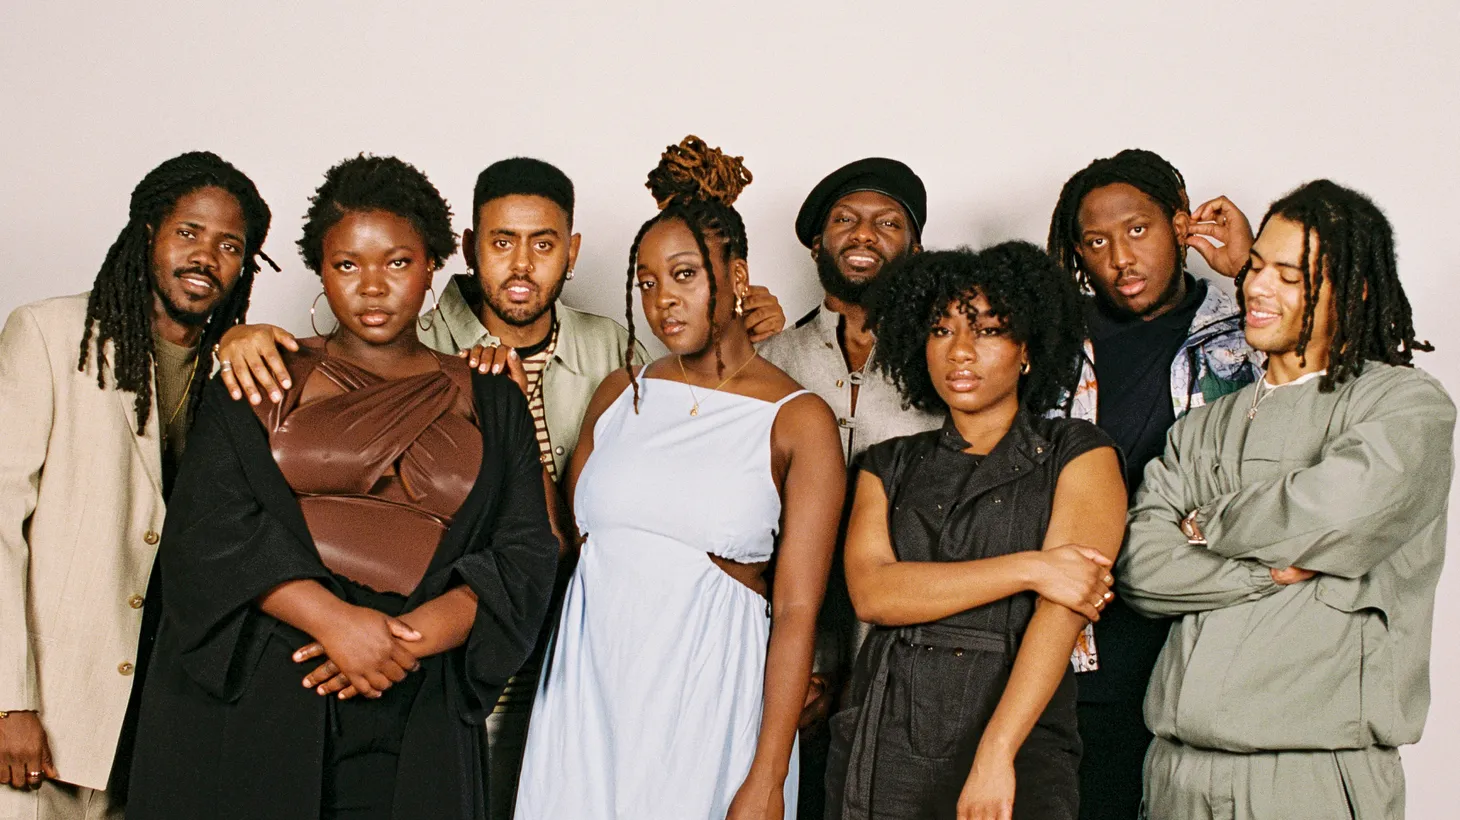 To celebrate the imminent release of 8-piece collective Kokoroko’s long awaited debut album “Could We Be More,” we raise our arms in praise of their intricate brand of afrobeat artistry.